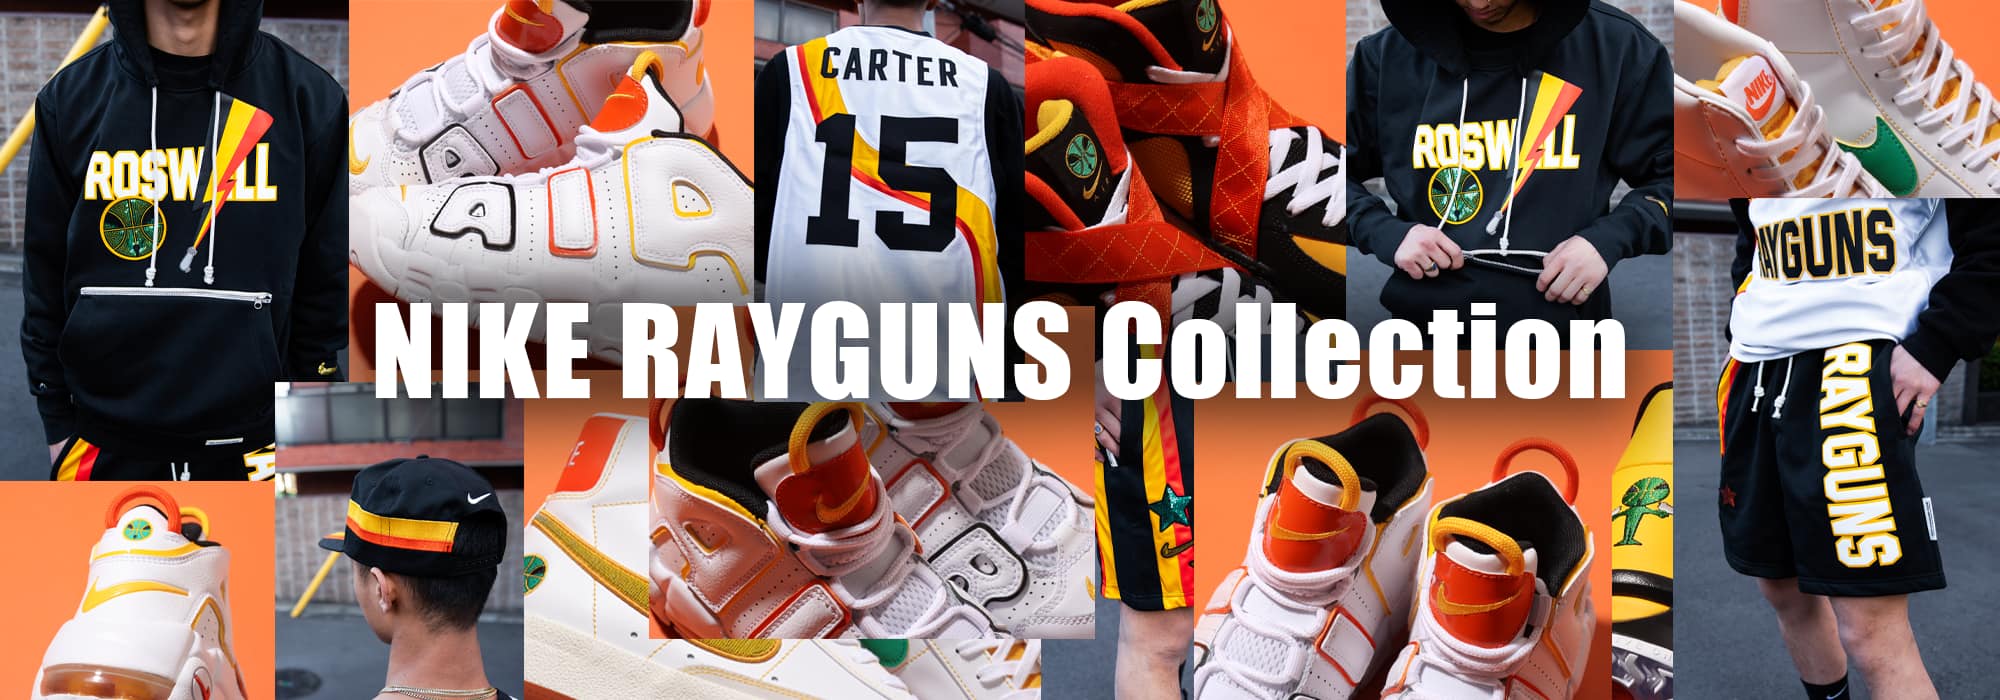 Nike Roswell Rayguns Collection